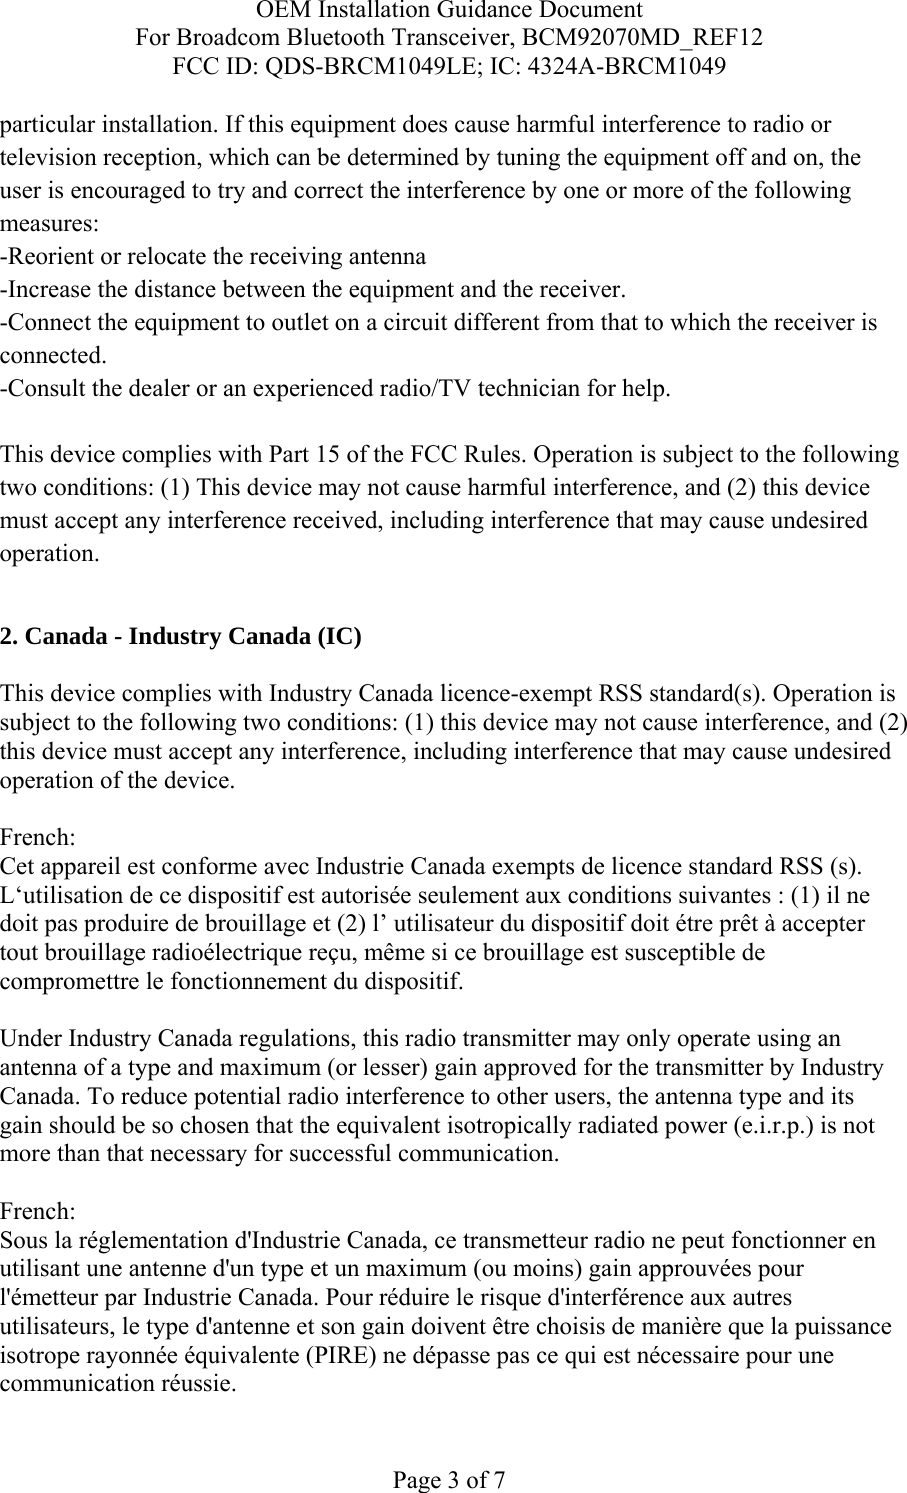 OEM Installation Guidance Document For Broadcom Bluetooth Transceiver, BCM92070MD_REF12 FCC ID: QDS-BRCM1049LE; IC: 4324A-BRCM1049  Page 3 of 7 particular installation. If this equipment does cause harmful interference to radio or television reception, which can be determined by tuning the equipment off and on, the user is encouraged to try and correct the interference by one or more of the following measures: -Reorient or relocate the receiving antenna -Increase the distance between the equipment and the receiver. -Connect the equipment to outlet on a circuit different from that to which the receiver is connected. -Consult the dealer or an experienced radio/TV technician for help.  This device complies with Part 15 of the FCC Rules. Operation is subject to the following two conditions: (1) This device may not cause harmful interference, and (2) this device must accept any interference received, including interference that may cause undesired operation.  2. Canada - Industry Canada (IC)  This device complies with Industry Canada licence-exempt RSS standard(s). Operation is subject to the following two conditions: (1) this device may not cause interference, and (2) this device must accept any interference, including interference that may cause undesired operation of the device.  French:  Cet appareil est conforme avec Industrie Canada exempts de licence standard RSS (s). L‘utilisation de ce dispositif est autorisée seulement aux conditions suivantes : (1) il ne doit pas produire de brouillage et (2) l’ utilisateur du dispositif doit étre prêt à accepter tout brouillage radioélectrique reçu, même si ce brouillage est susceptible de compromettre le fonctionnement du dispositif.  Under Industry Canada regulations, this radio transmitter may only operate using an antenna of a type and maximum (or lesser) gain approved for the transmitter by Industry Canada. To reduce potential radio interference to other users, the antenna type and its gain should be so chosen that the equivalent isotropically radiated power (e.i.r.p.) is not more than that necessary for successful communication.  French:  Sous la réglementation d&apos;Industrie Canada, ce transmetteur radio ne peut fonctionner en utilisant une antenne d&apos;un type et un maximum (ou moins) gain approuvées pour l&apos;émetteur par Industrie Canada. Pour réduire le risque d&apos;interférence aux autres utilisateurs, le type d&apos;antenne et son gain doivent être choisis de manière que la puissance isotrope rayonnée équivalente (PIRE) ne dépasse pas ce qui est nécessaire pour une communication réussie. 